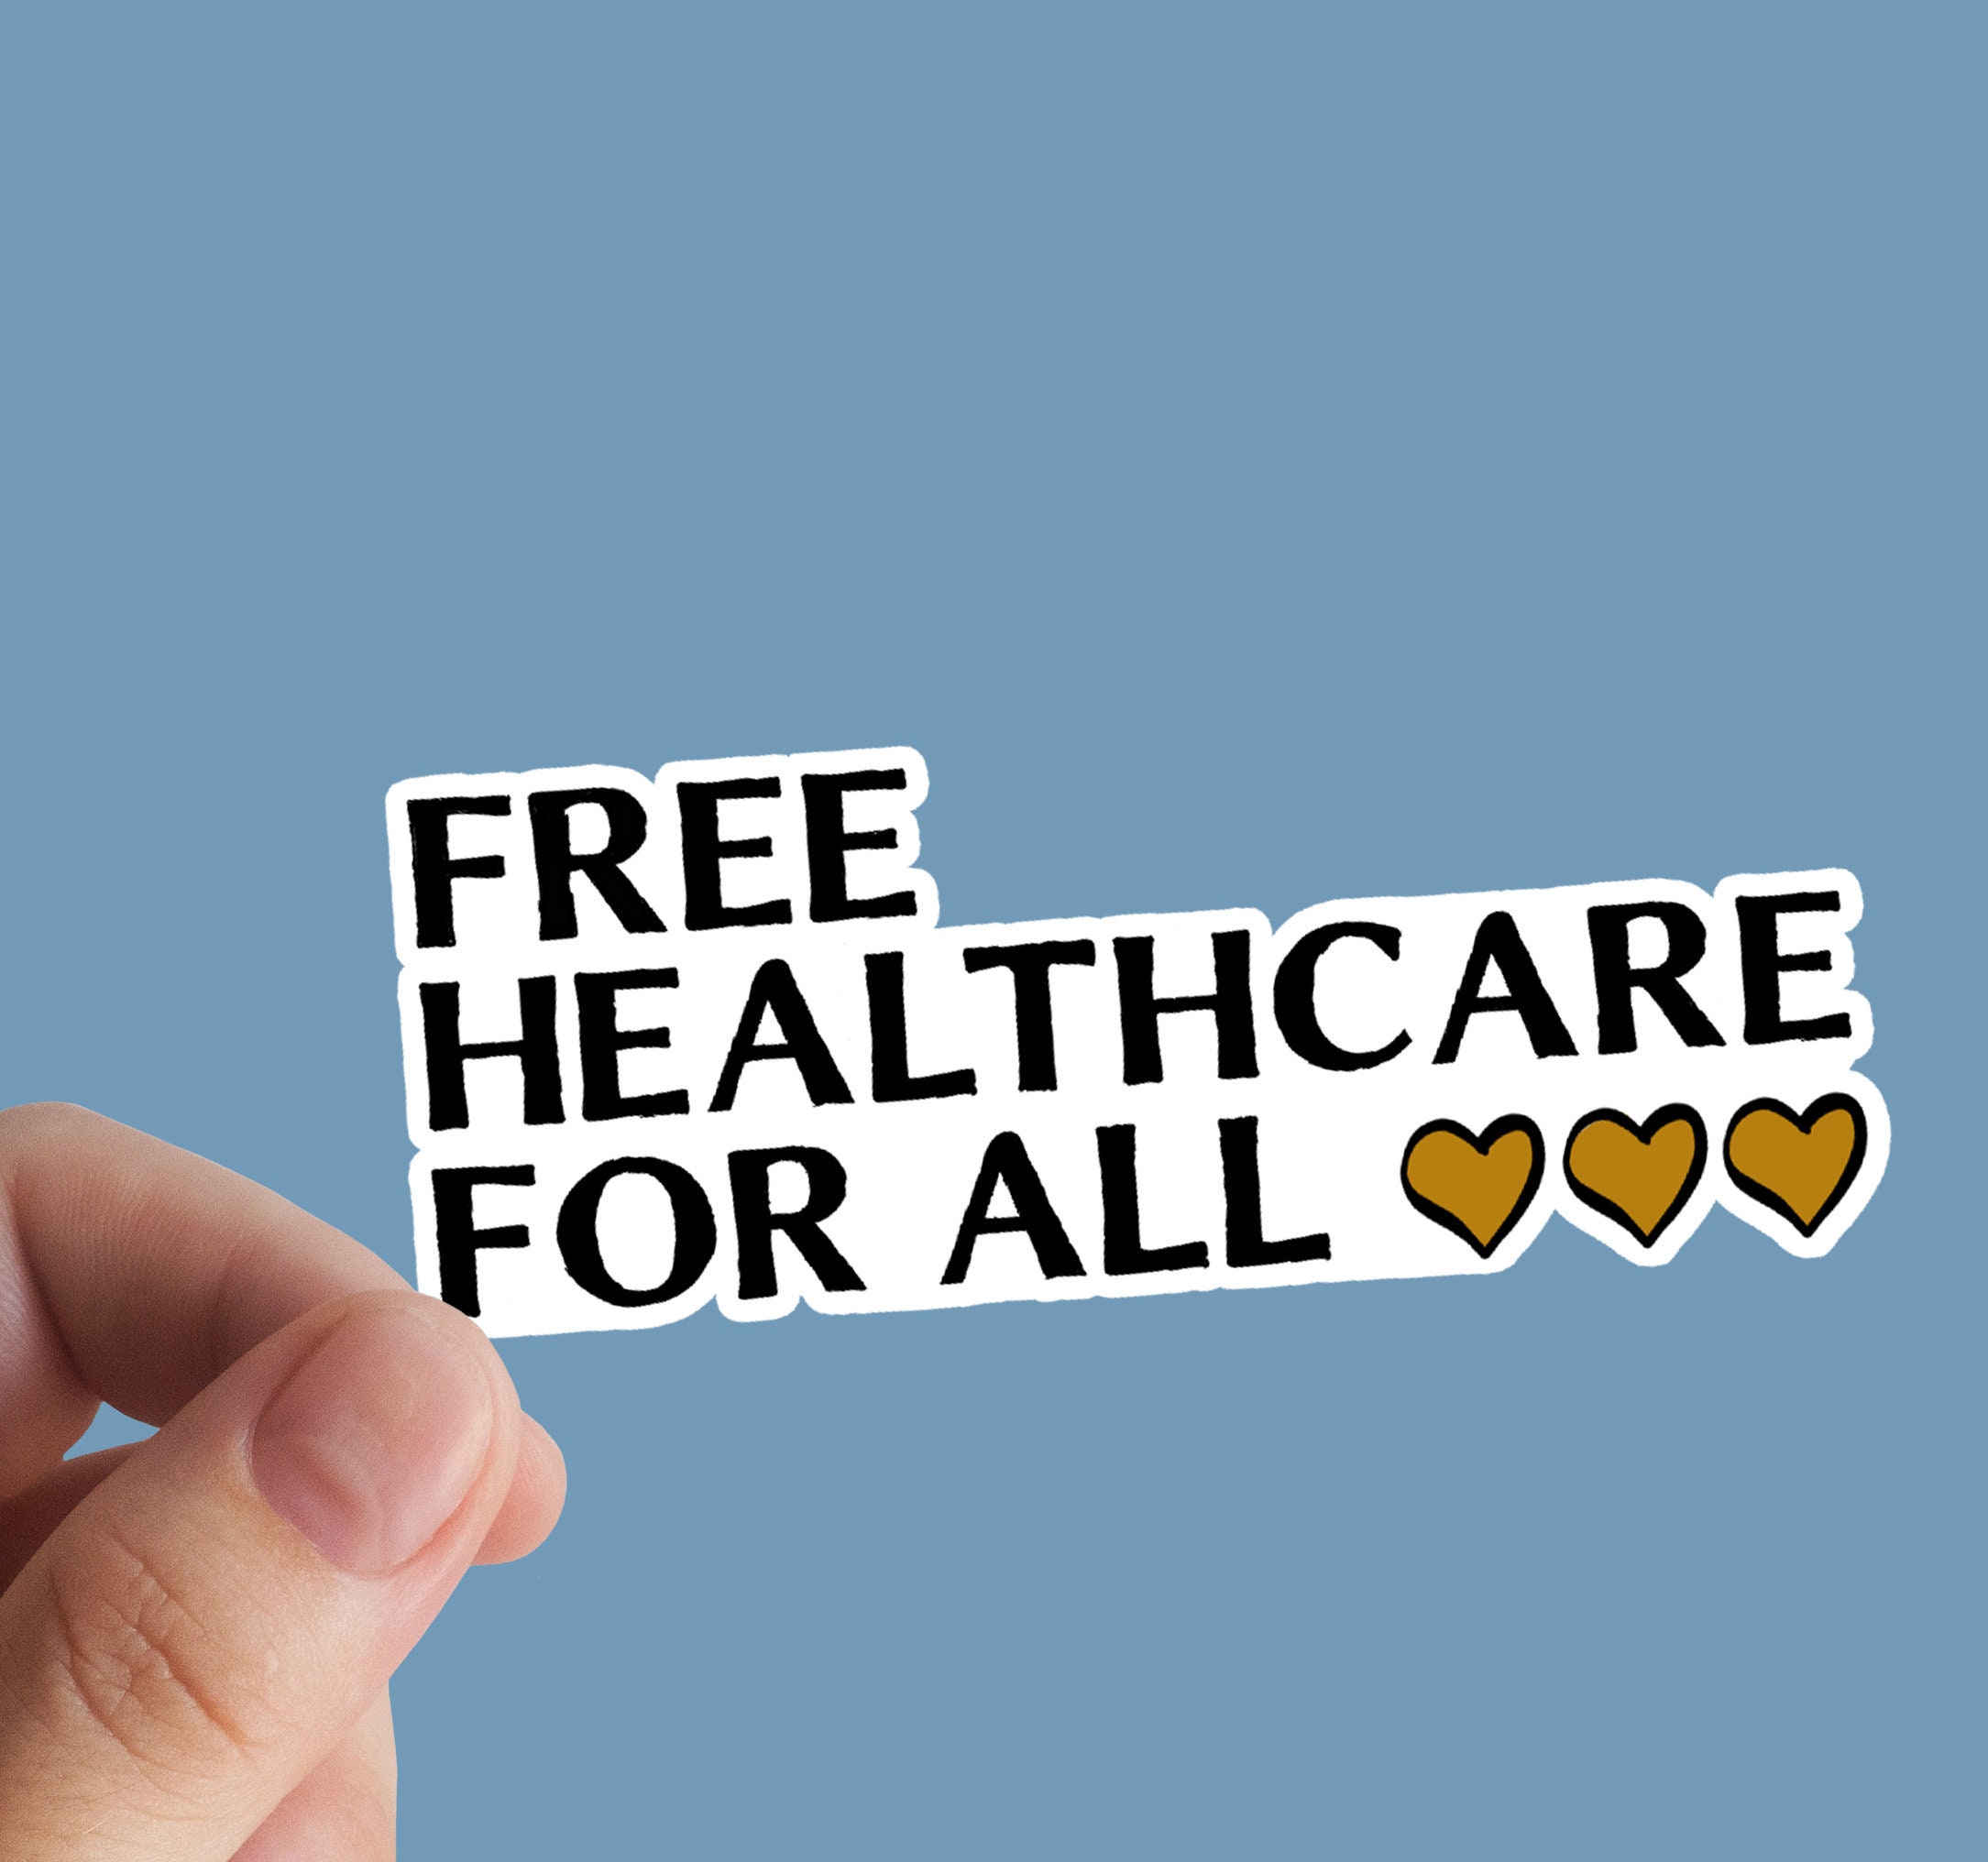 Healthcare, Free Full-Text